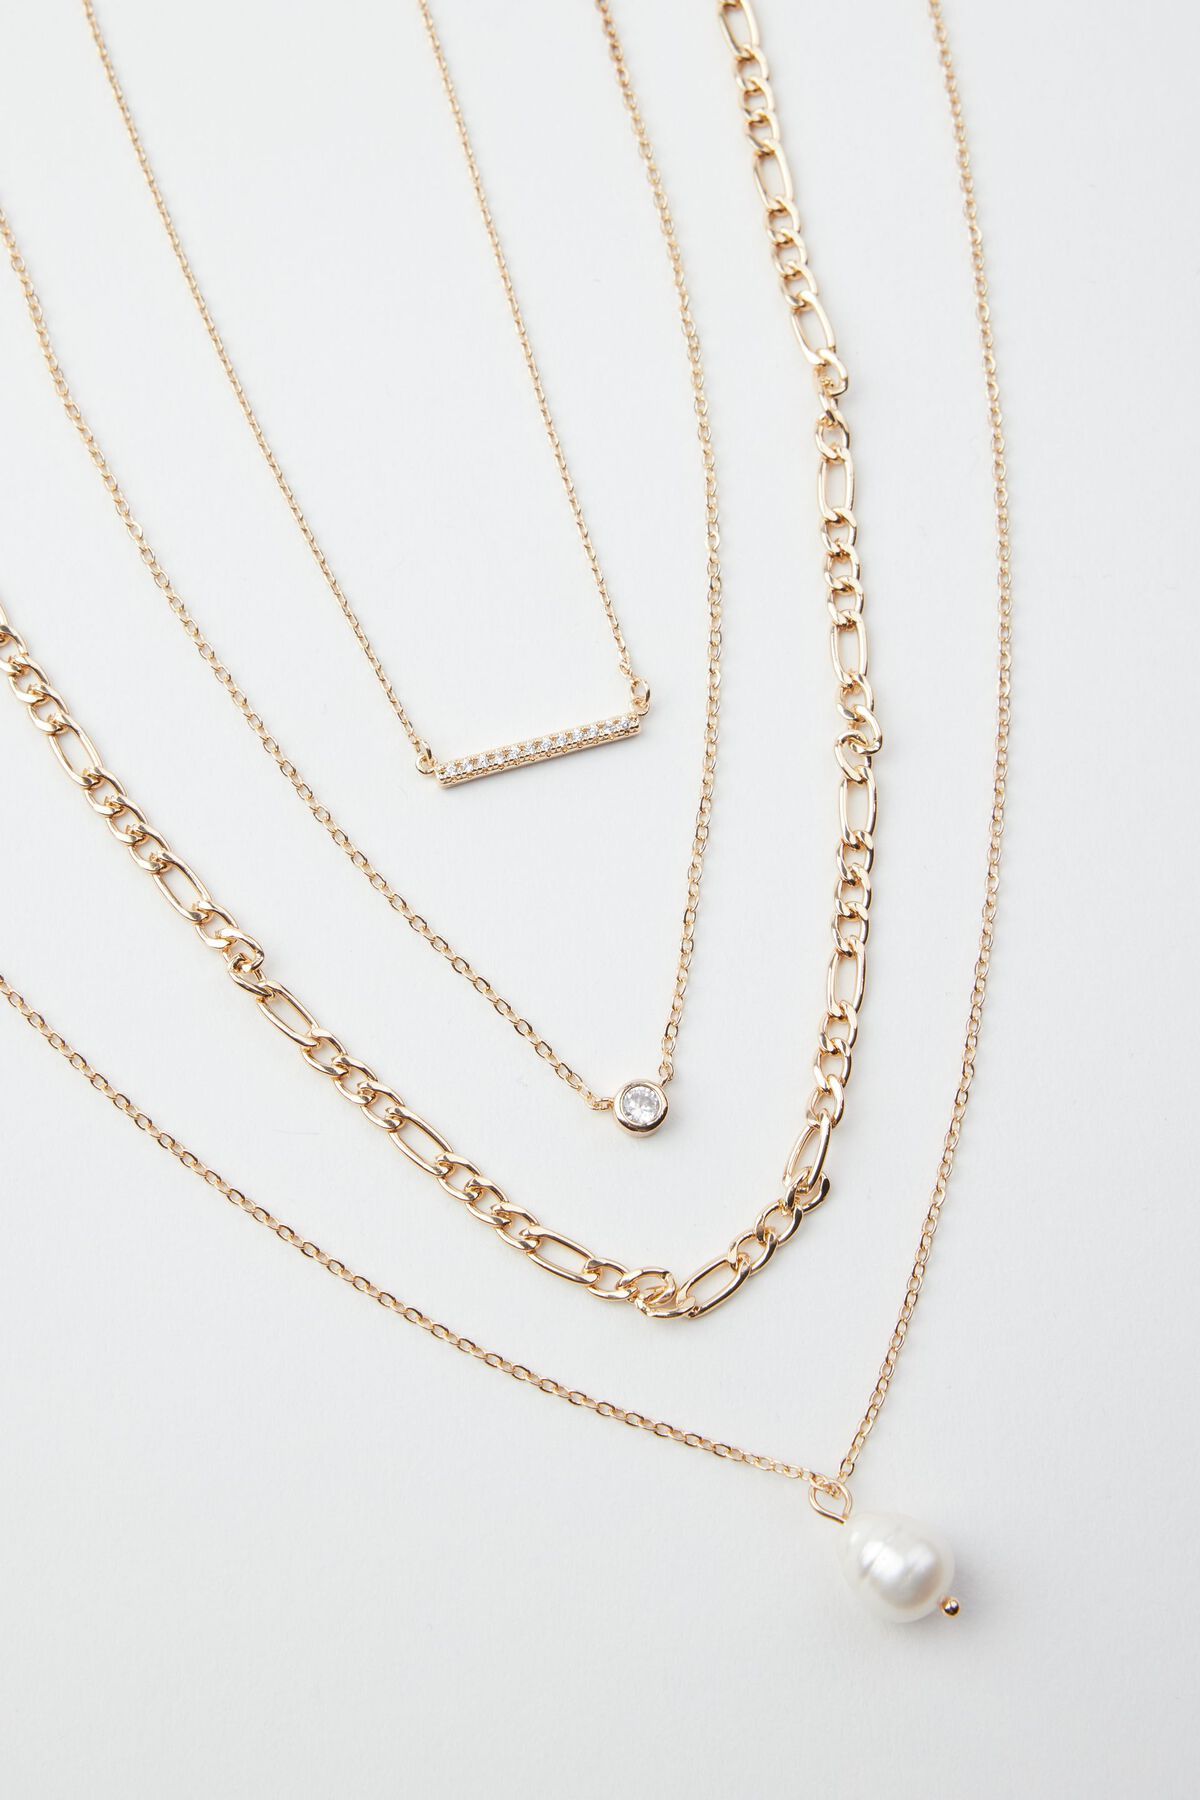 Dynamite Layered Gem & Pearl Chain Necklace. 3